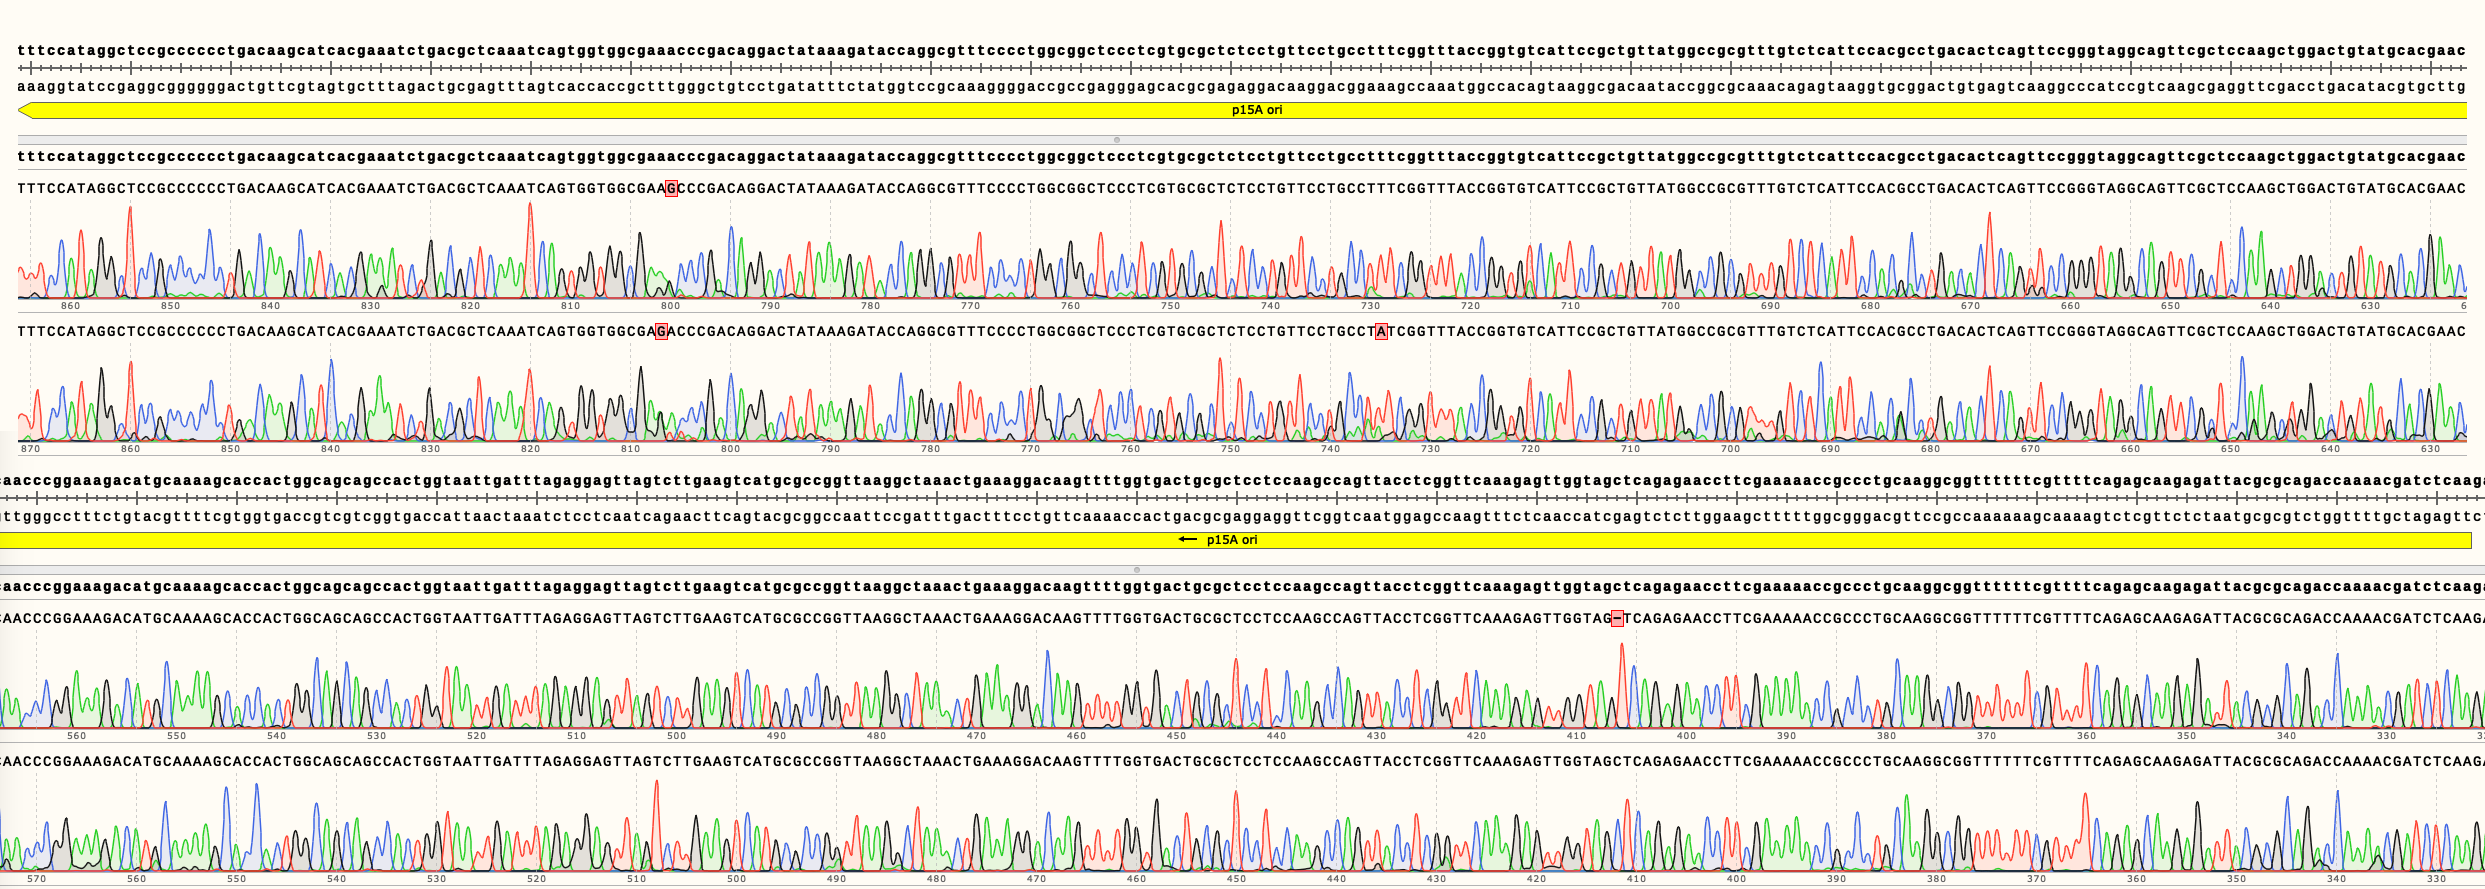 Sequencing of the origin of replication p15A of pSB3K02.